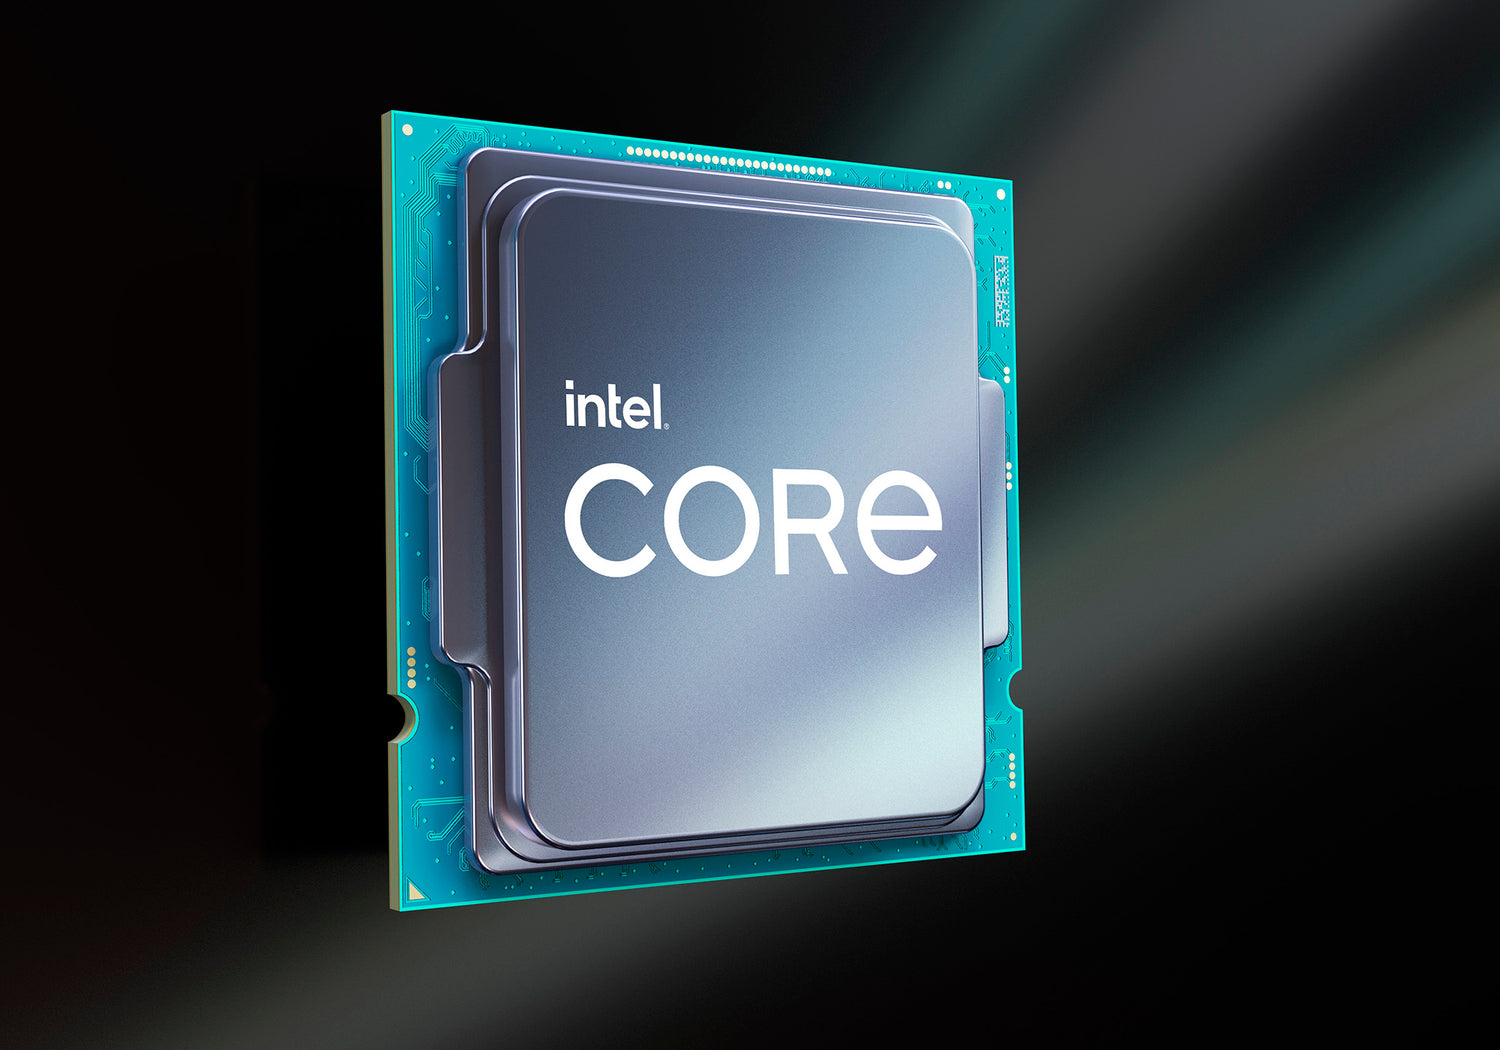 Intel’s 11th Gen processor: is it an upgrade worth buying?